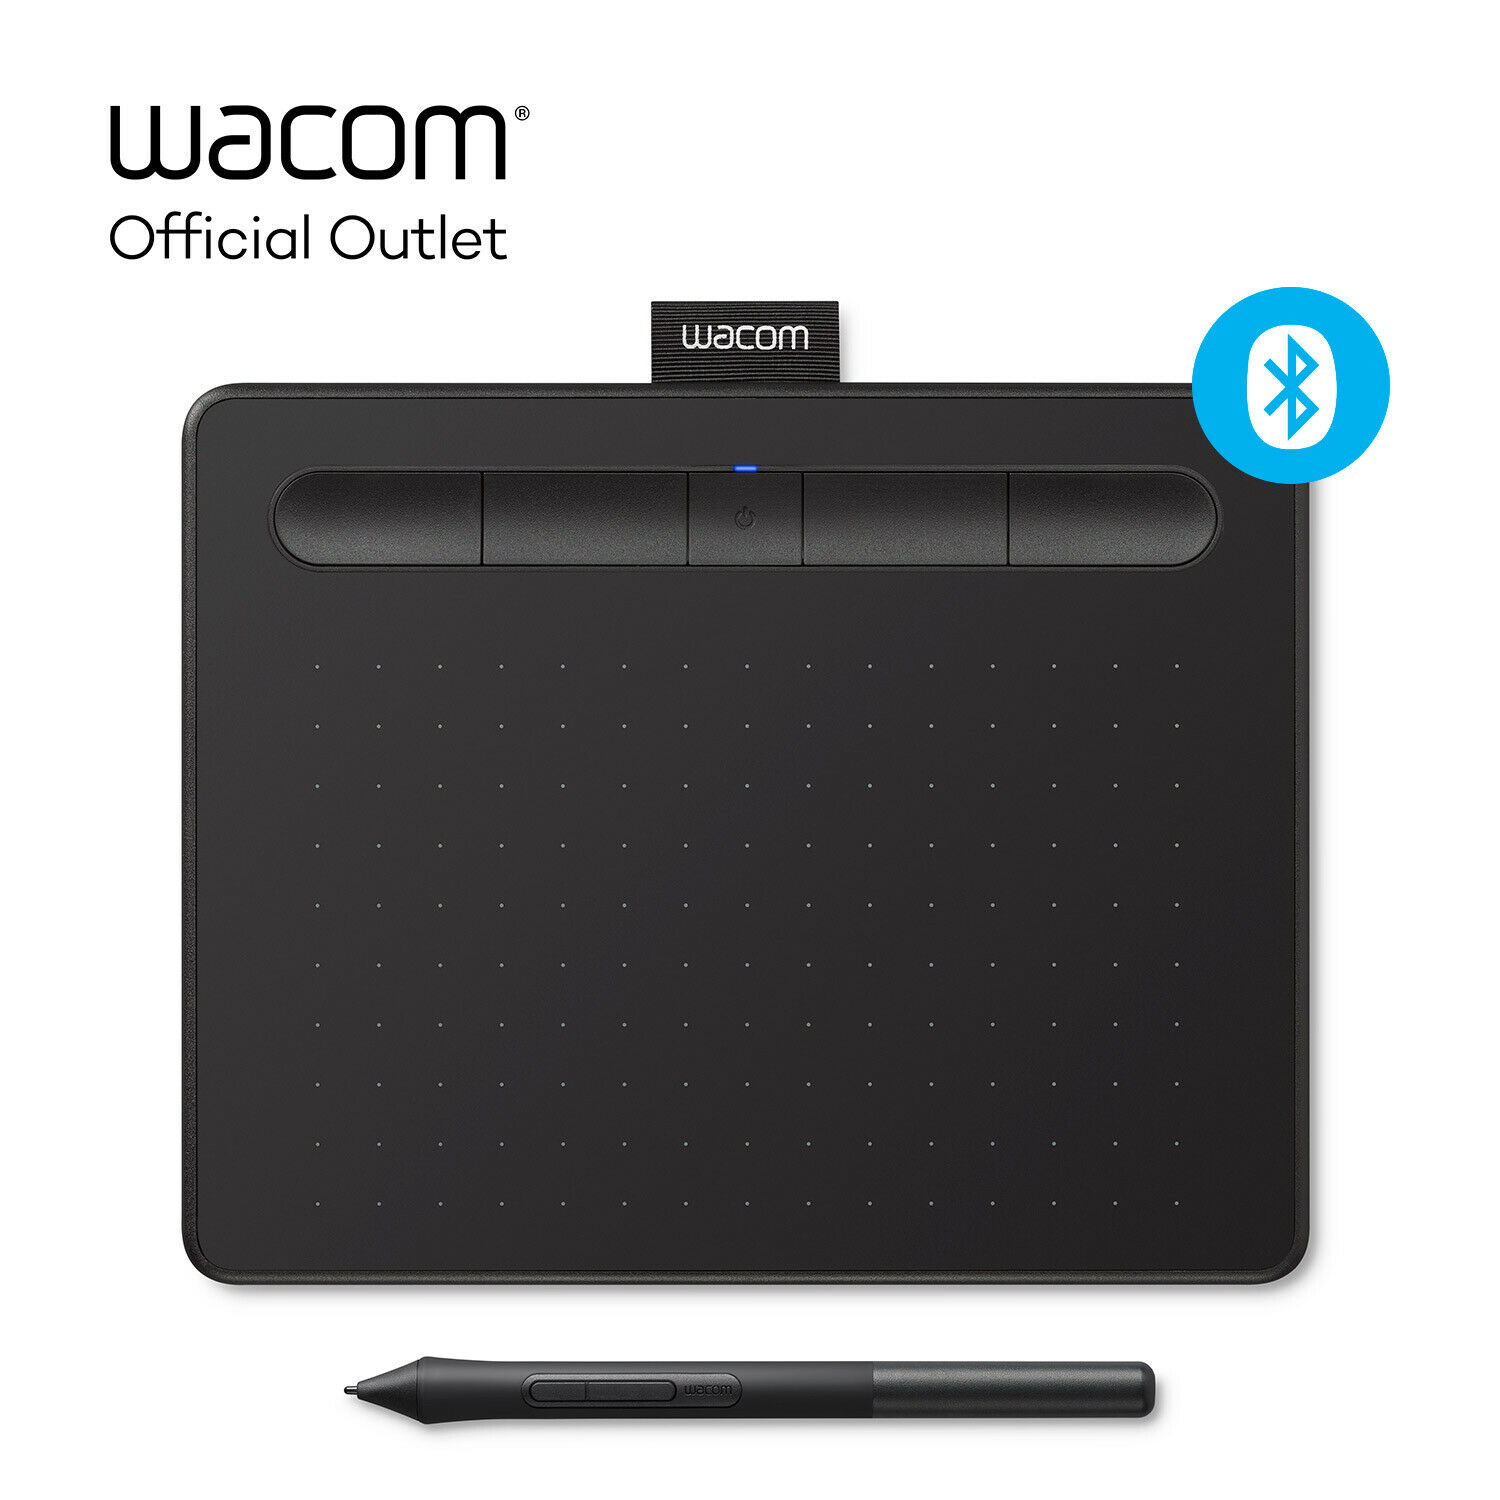 Certified Refurbished Wacom Intuos Small Wireless Graphics Tablet - Black